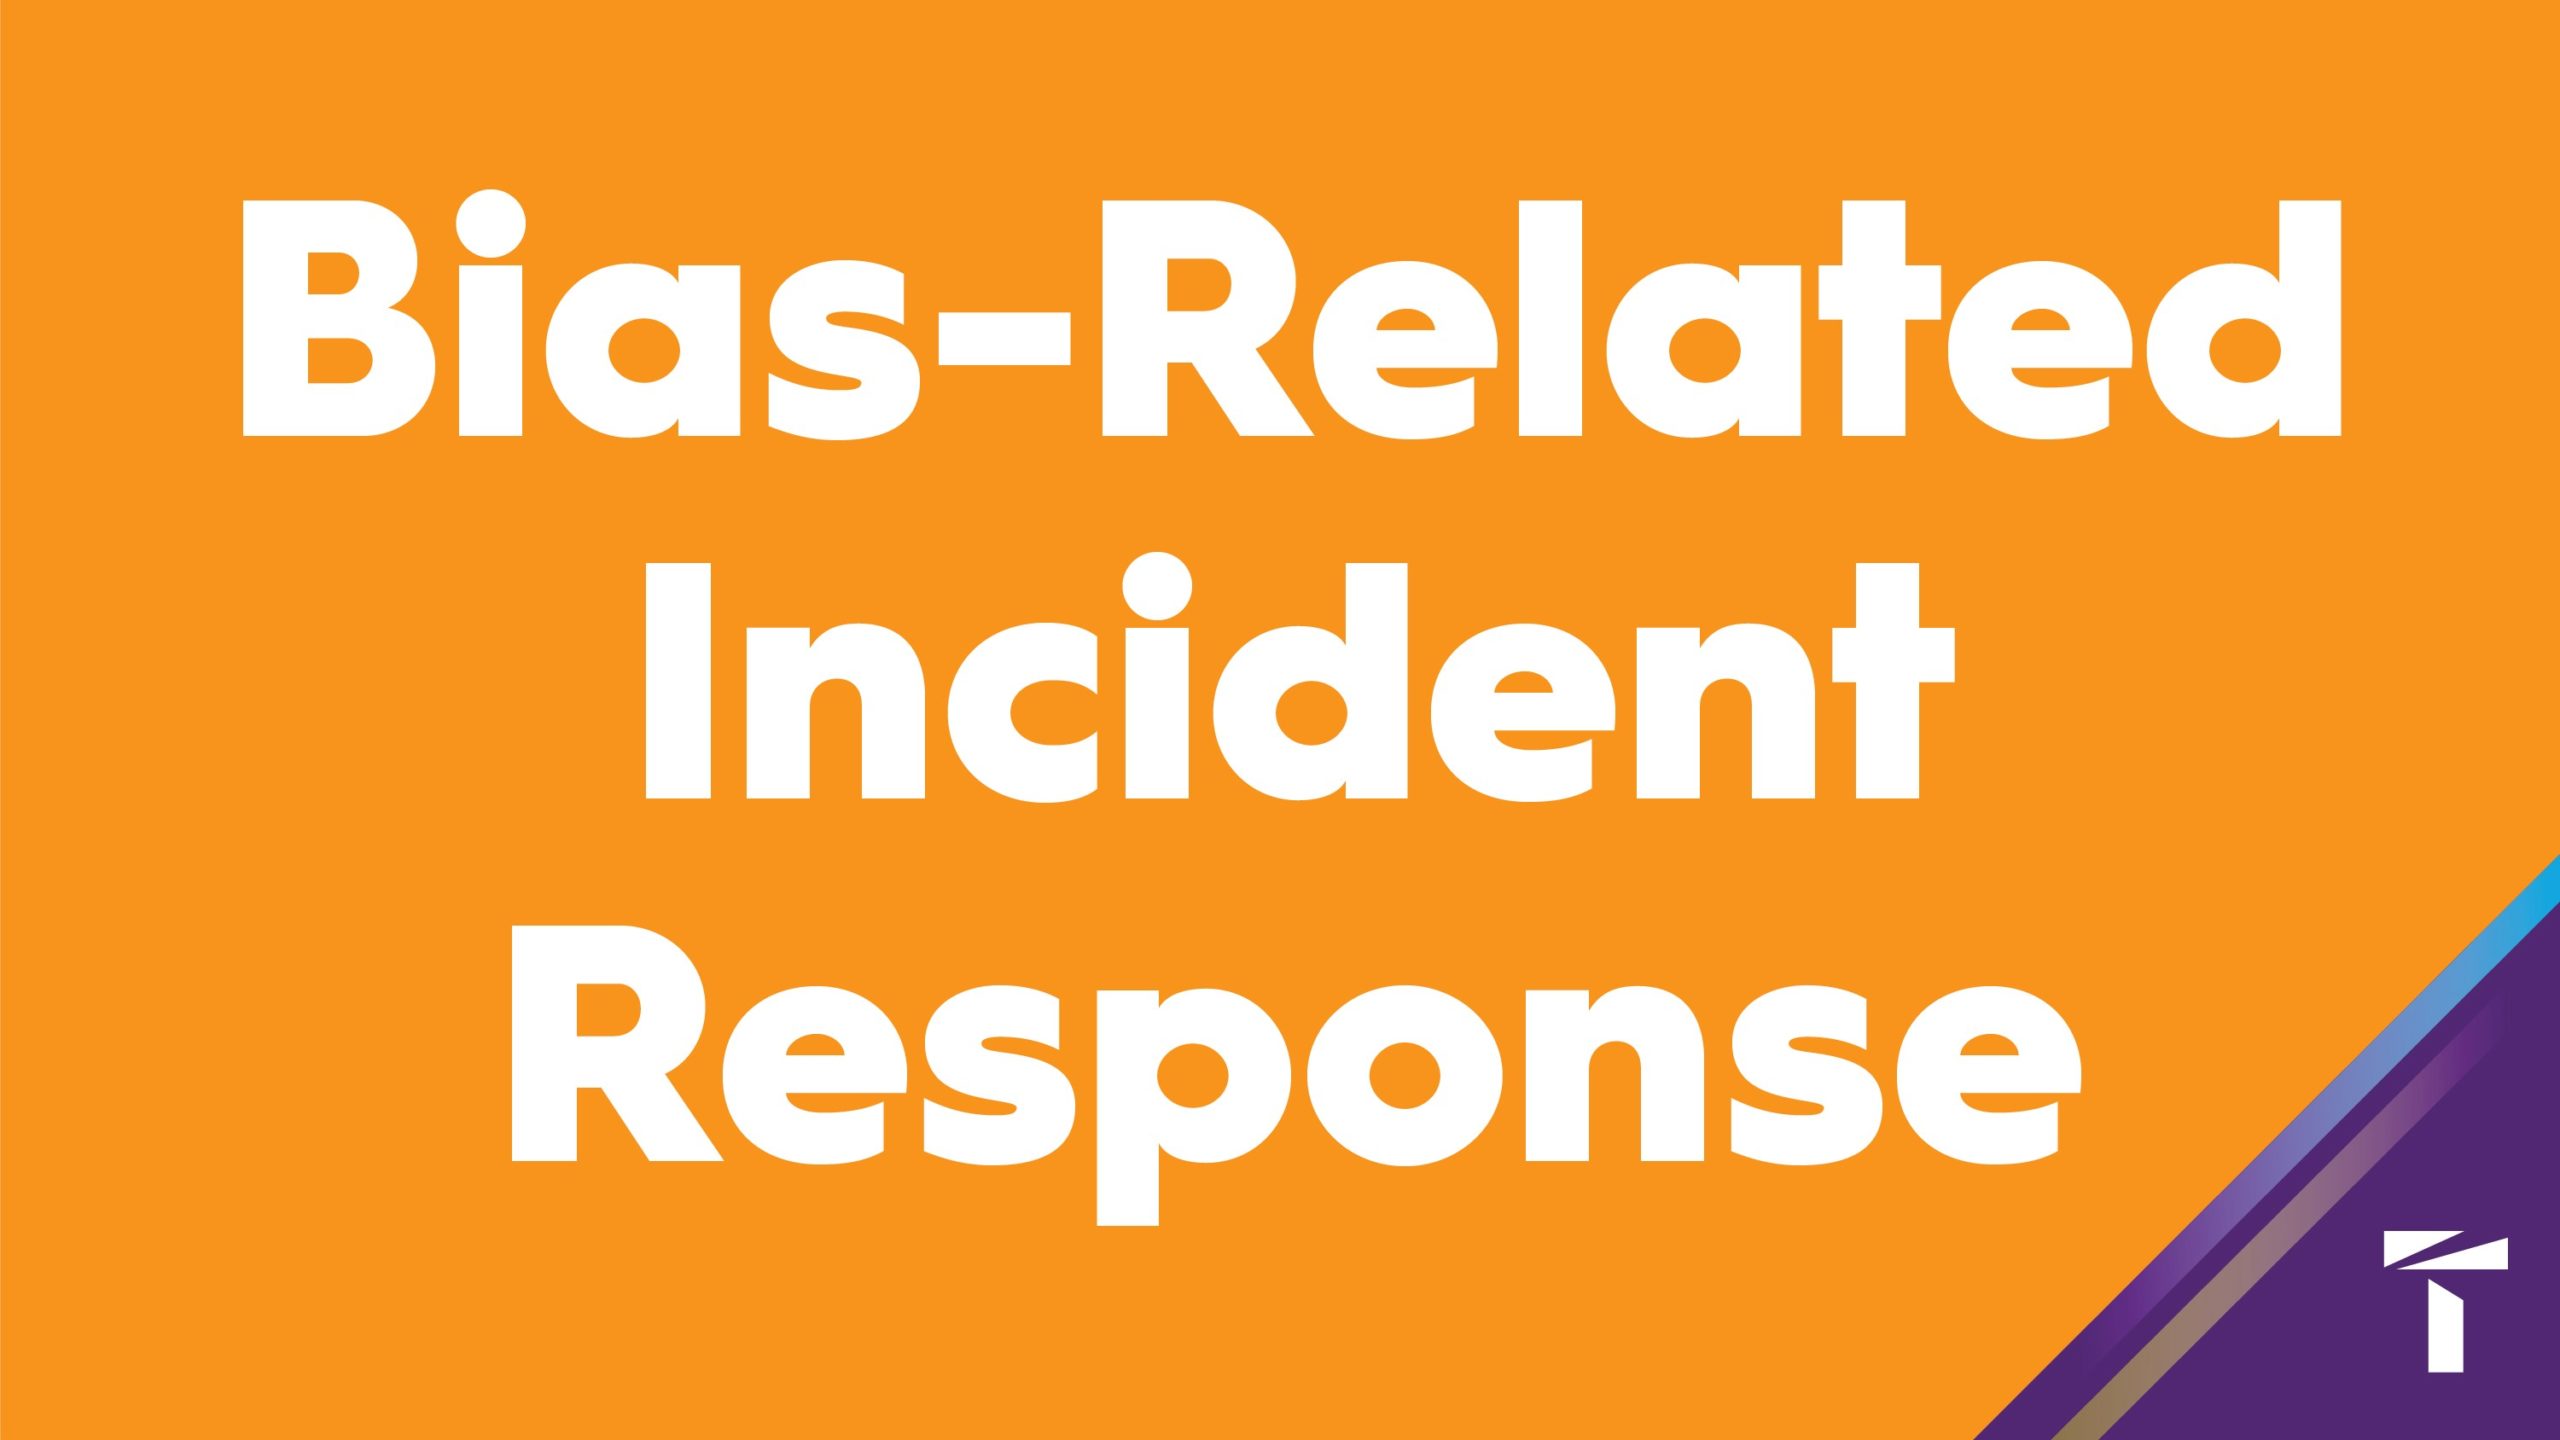 Bias-Related Incident Response